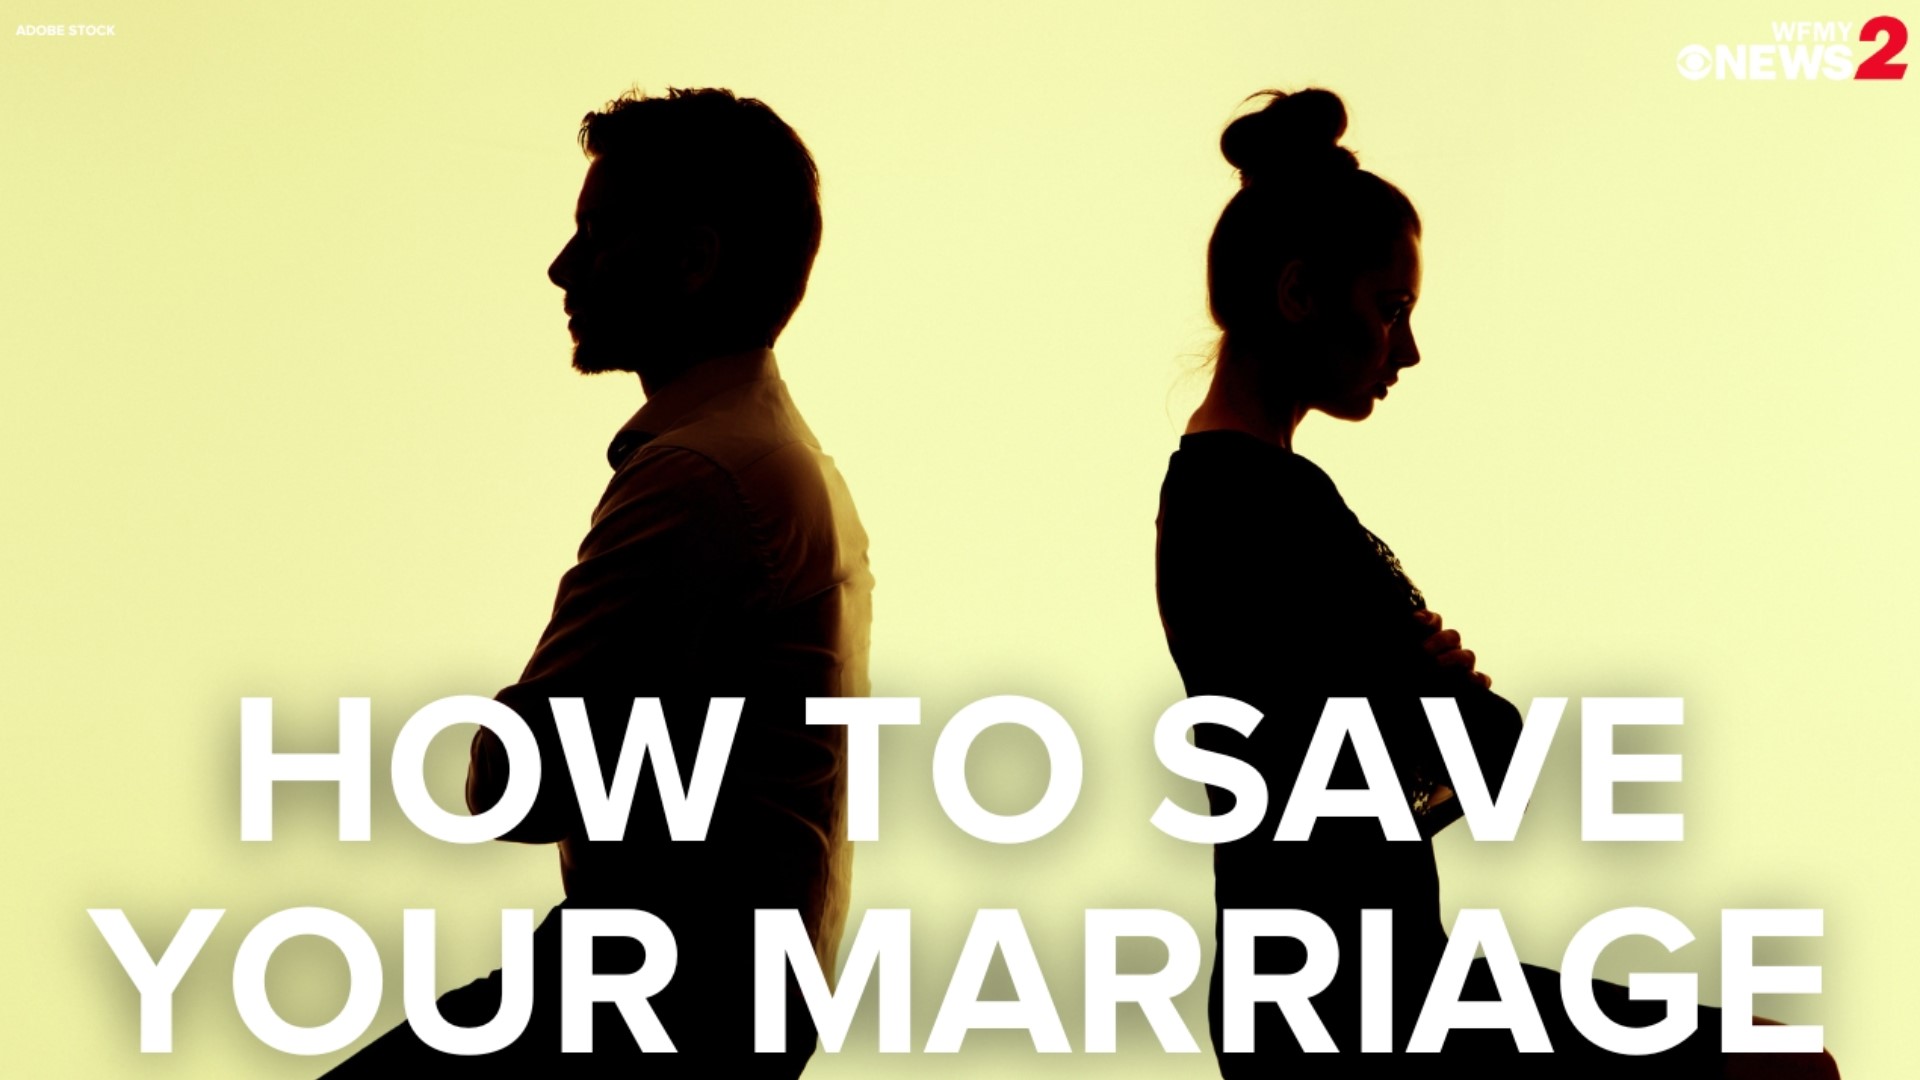 Body language expert Blanca Cobb advises on how to save your marriage before divorce.